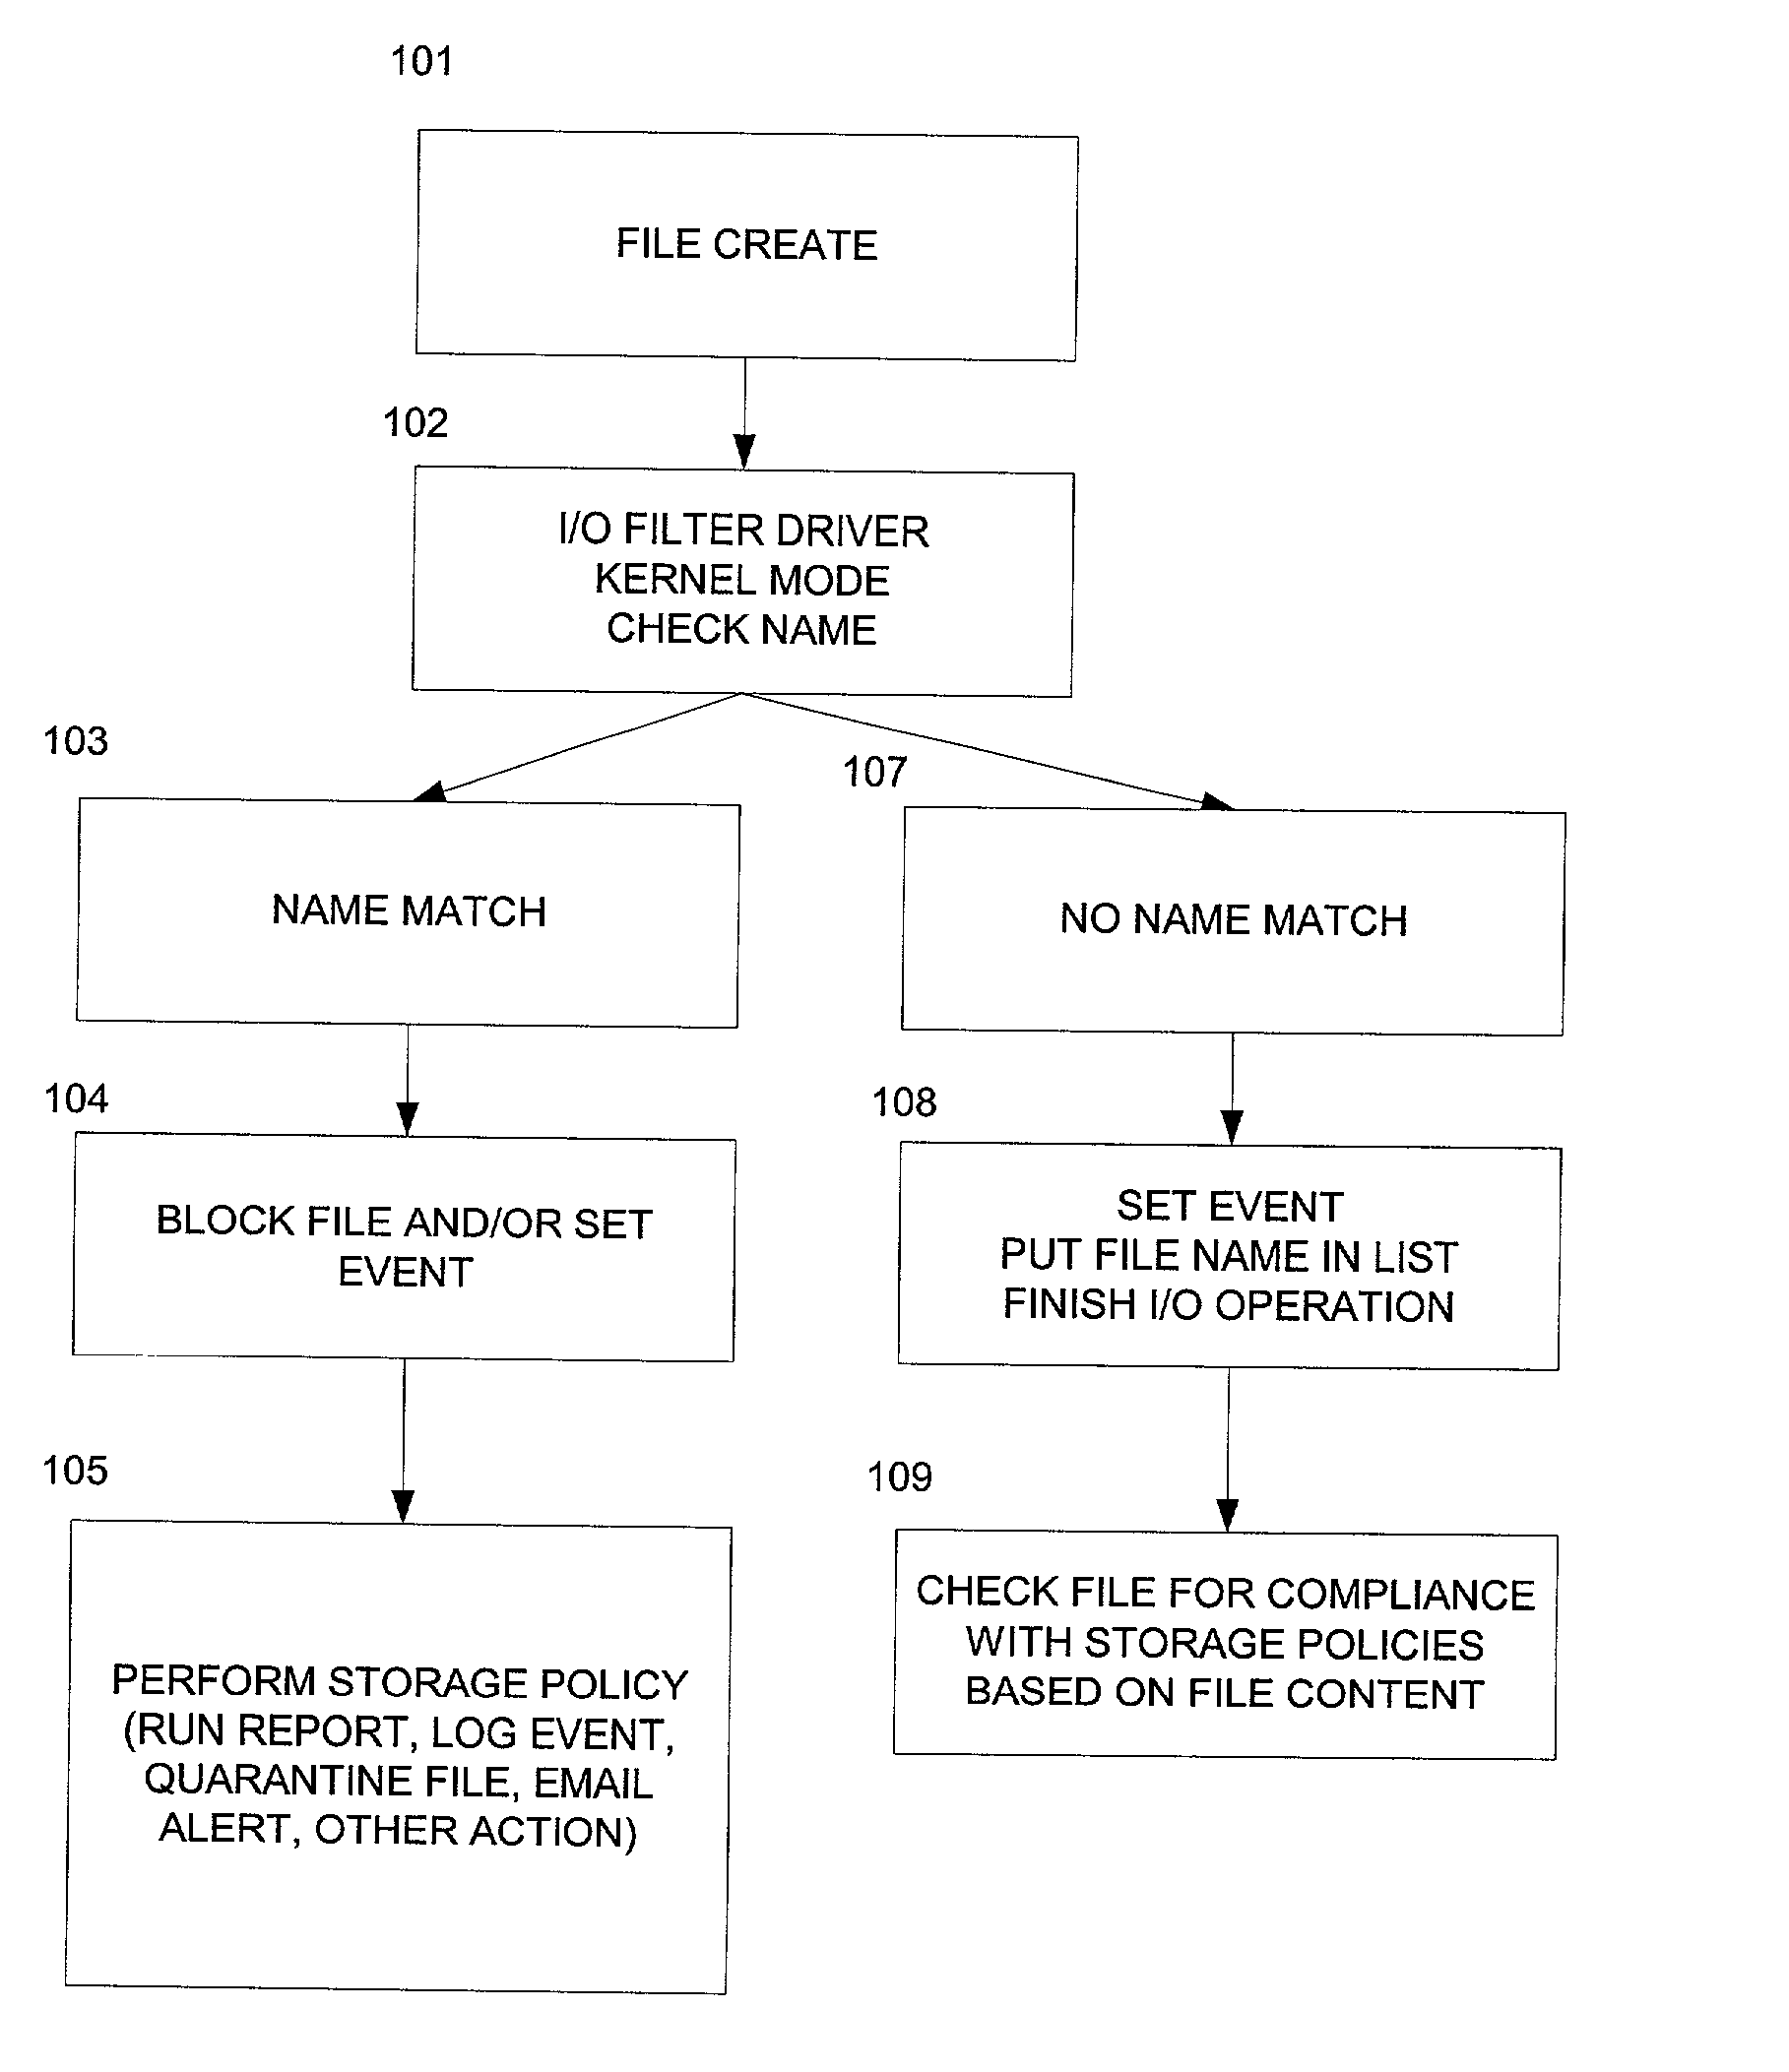 Filter driver for identifying disk files by analysis of content